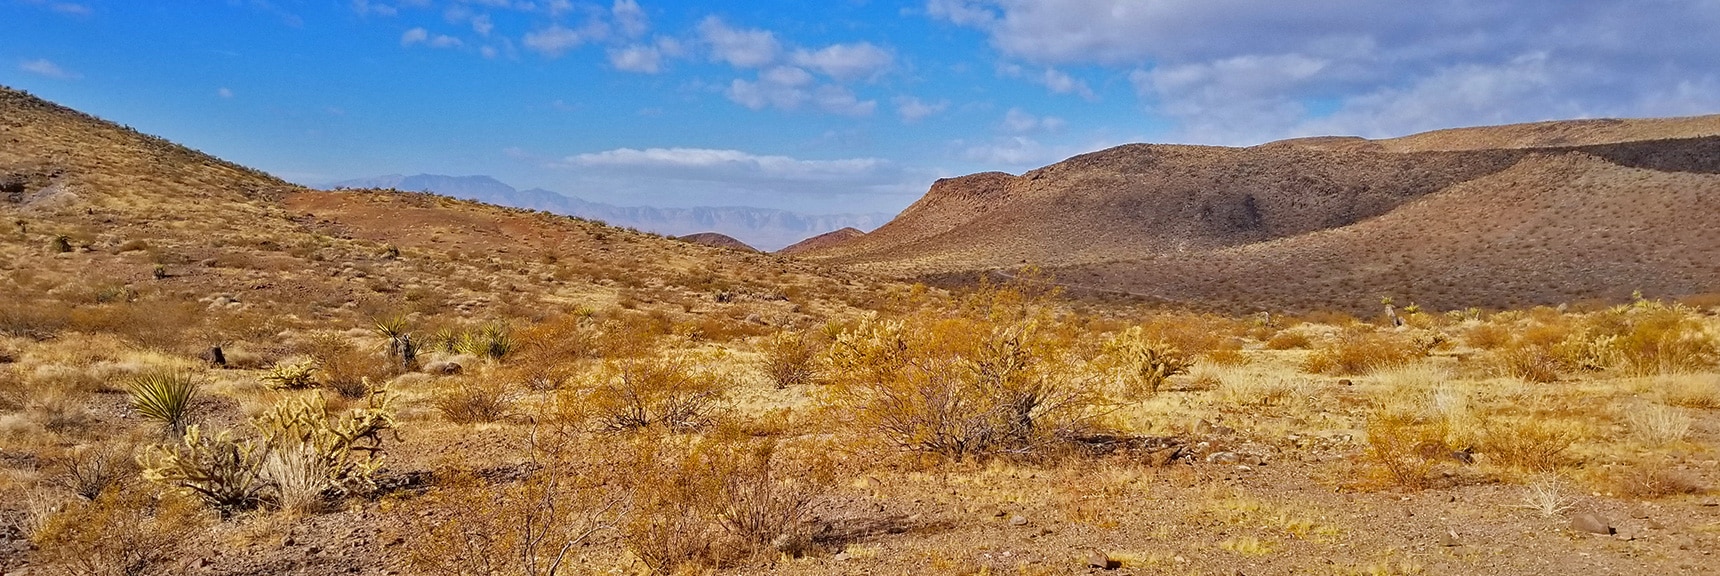 First View Toward the Las Vegas Valley and Across to Red Rock Park Area | McCullough Hills Trail in Sloan Canyon National Conservation Area, Nevada